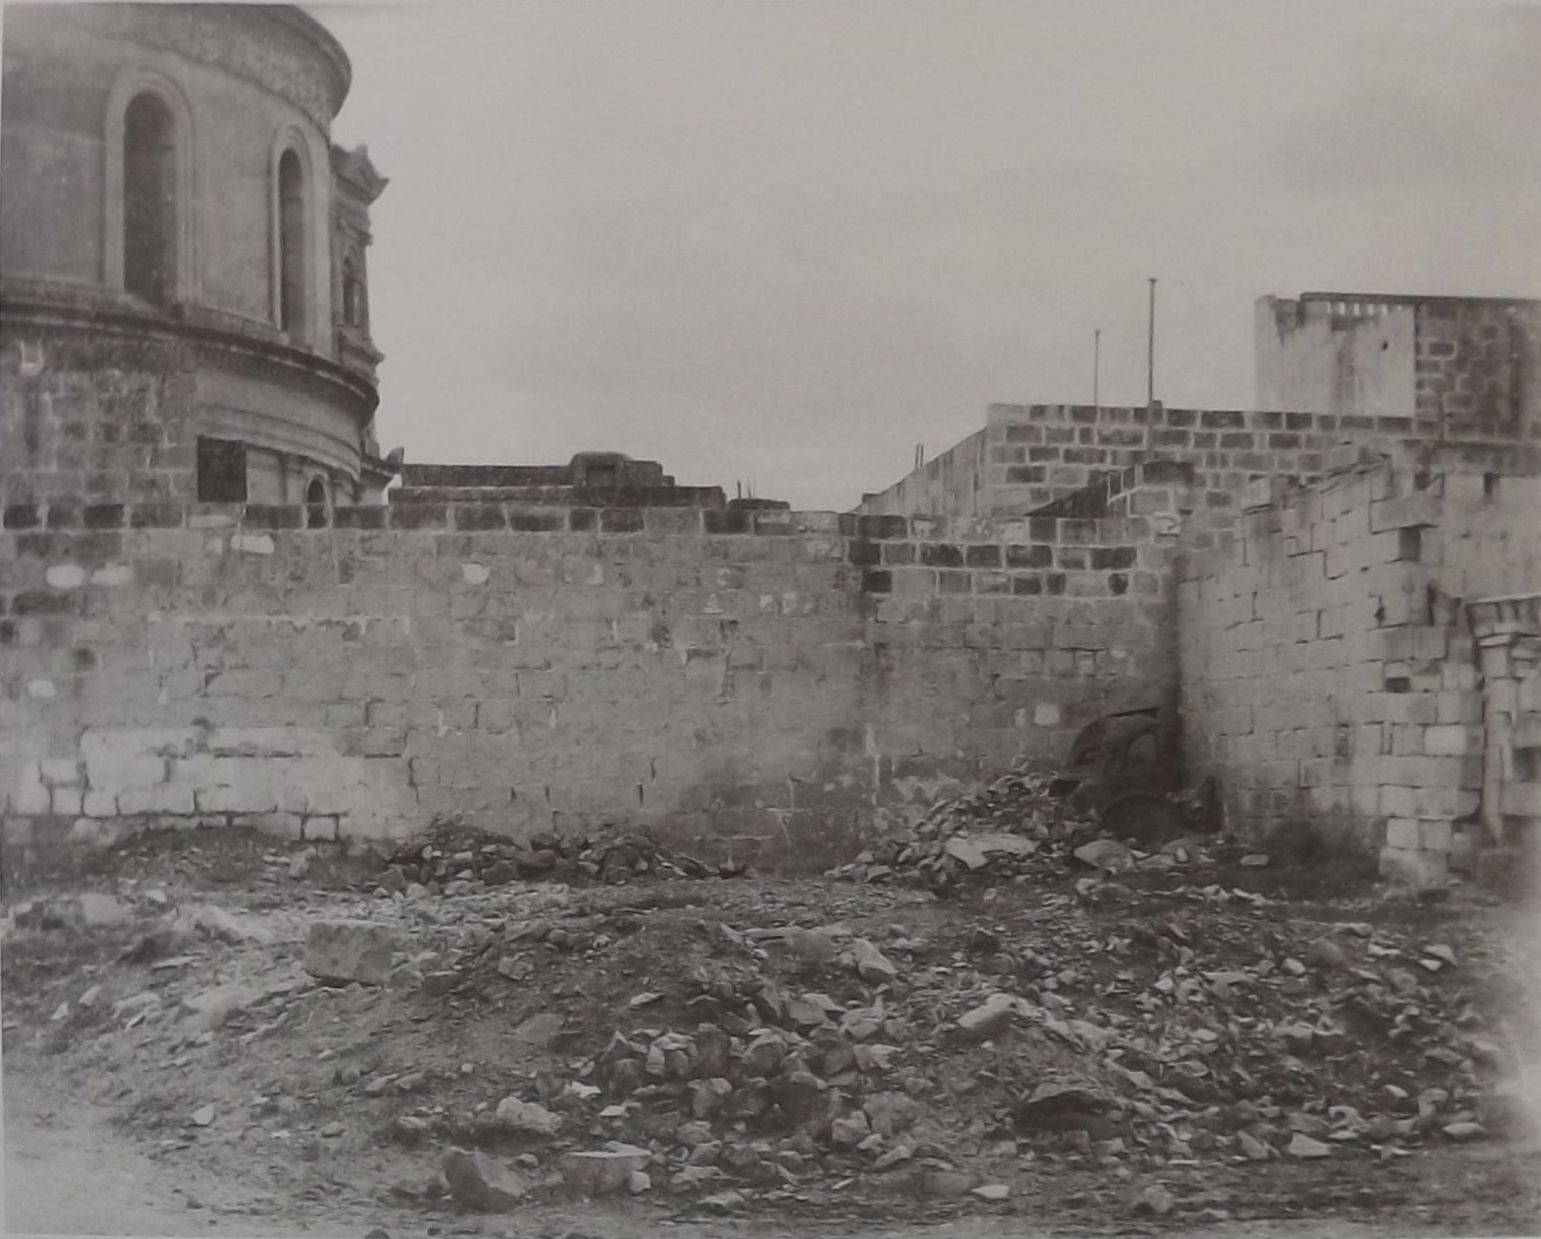 Demolished buildings in Curate Schembri Street Nos. 1, 2 and 3.